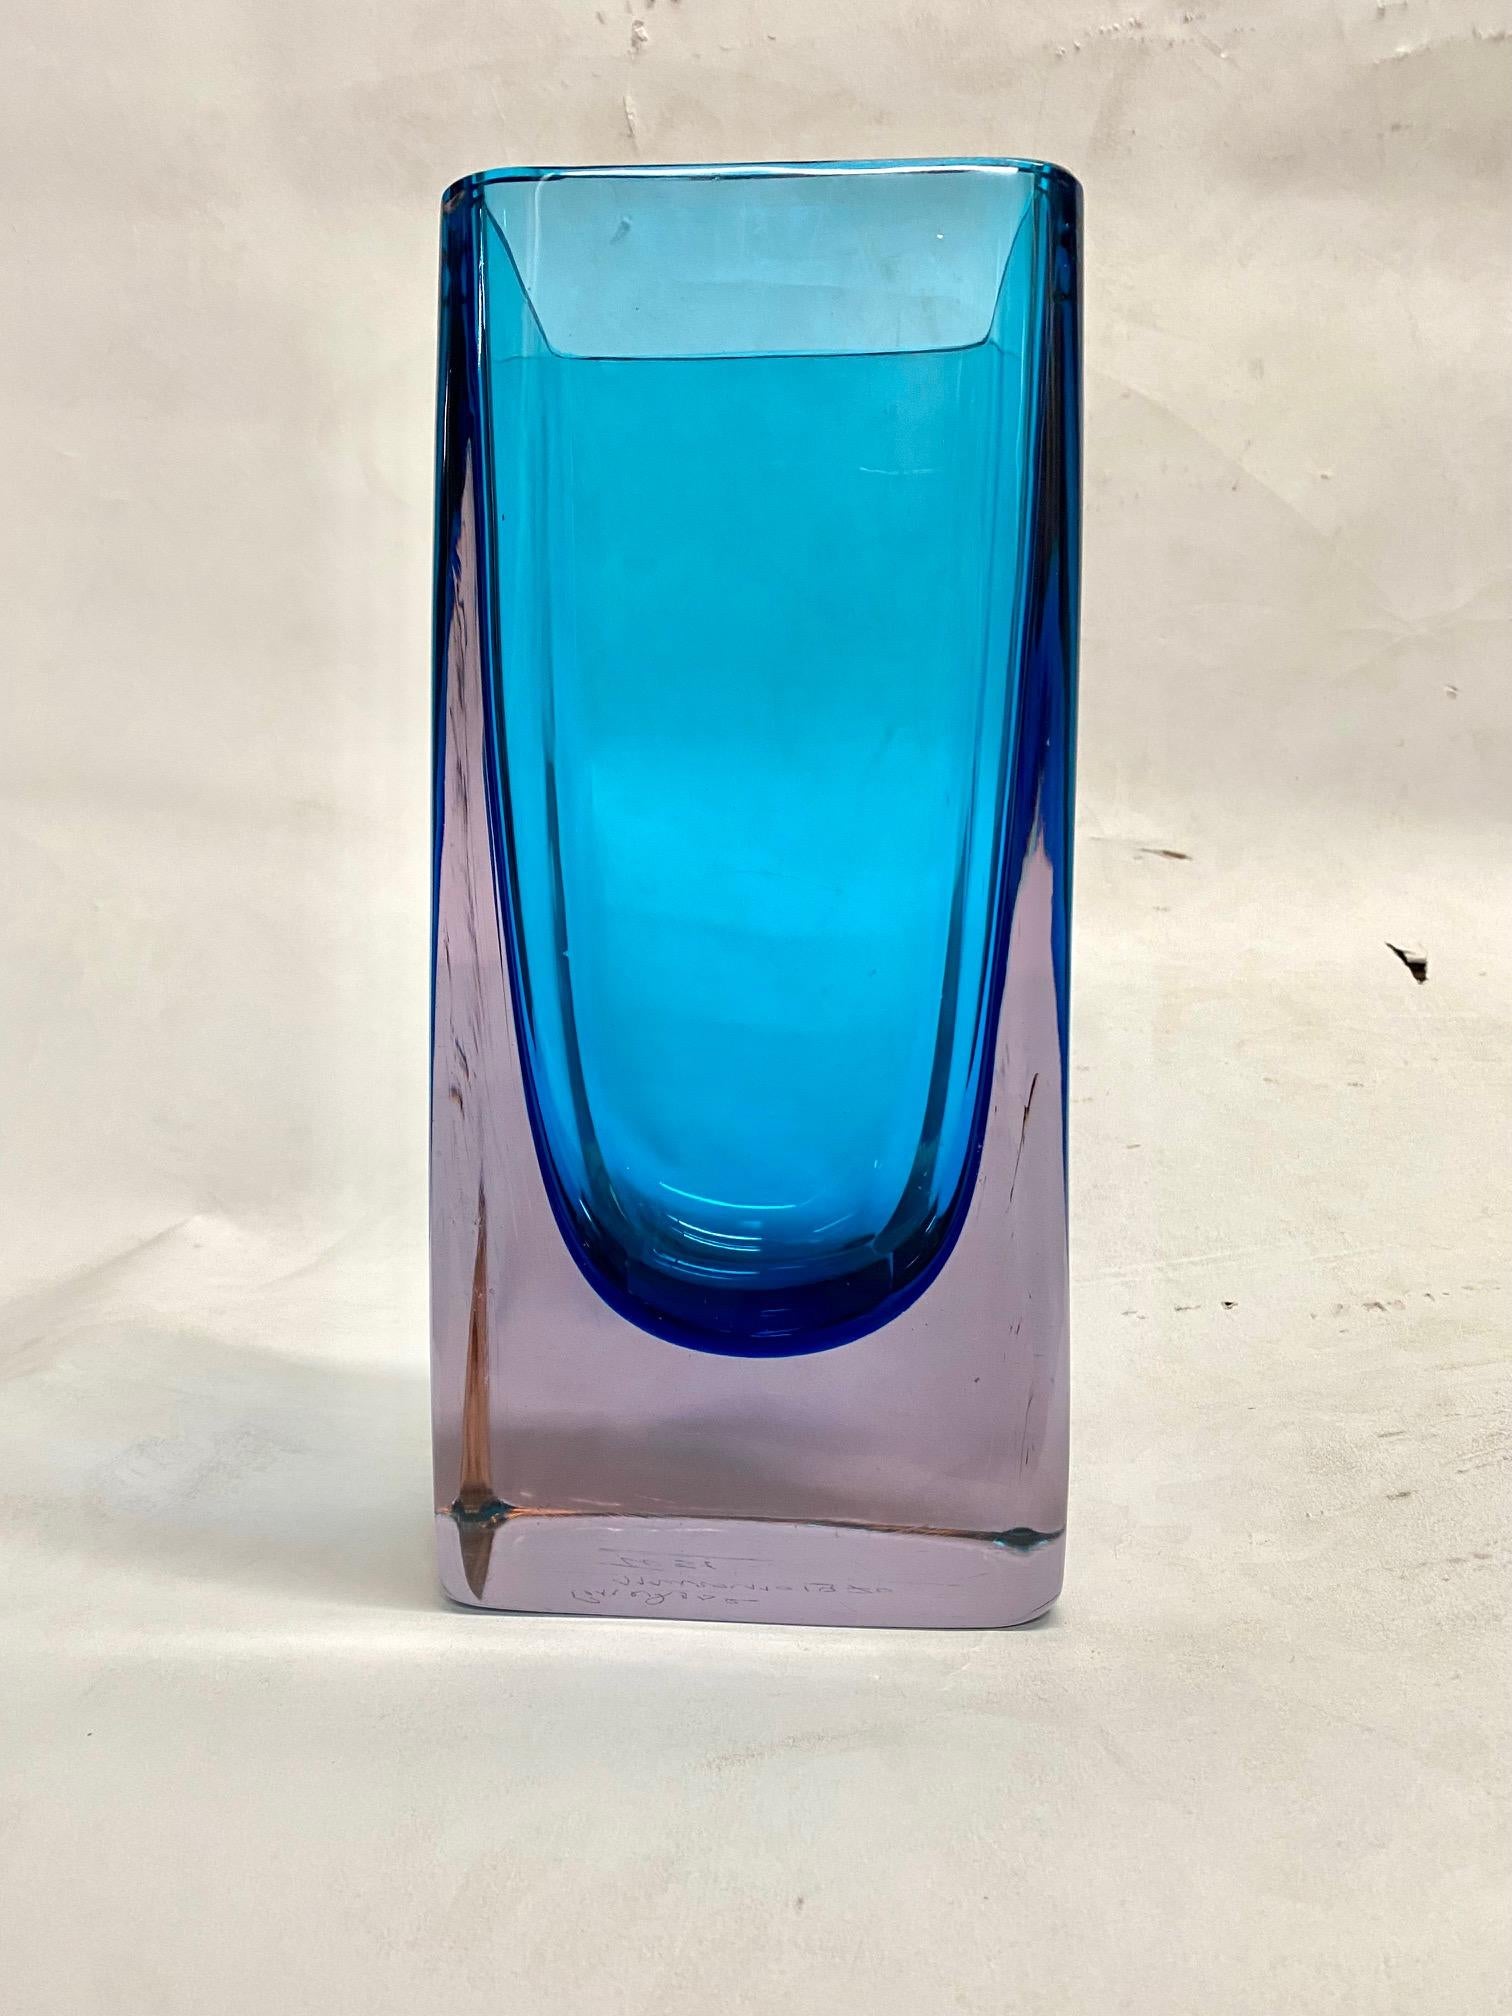 Murano blue glass “sommerso” vase by Fabio Tosi for Cenedese glass vase. Signed etched: 